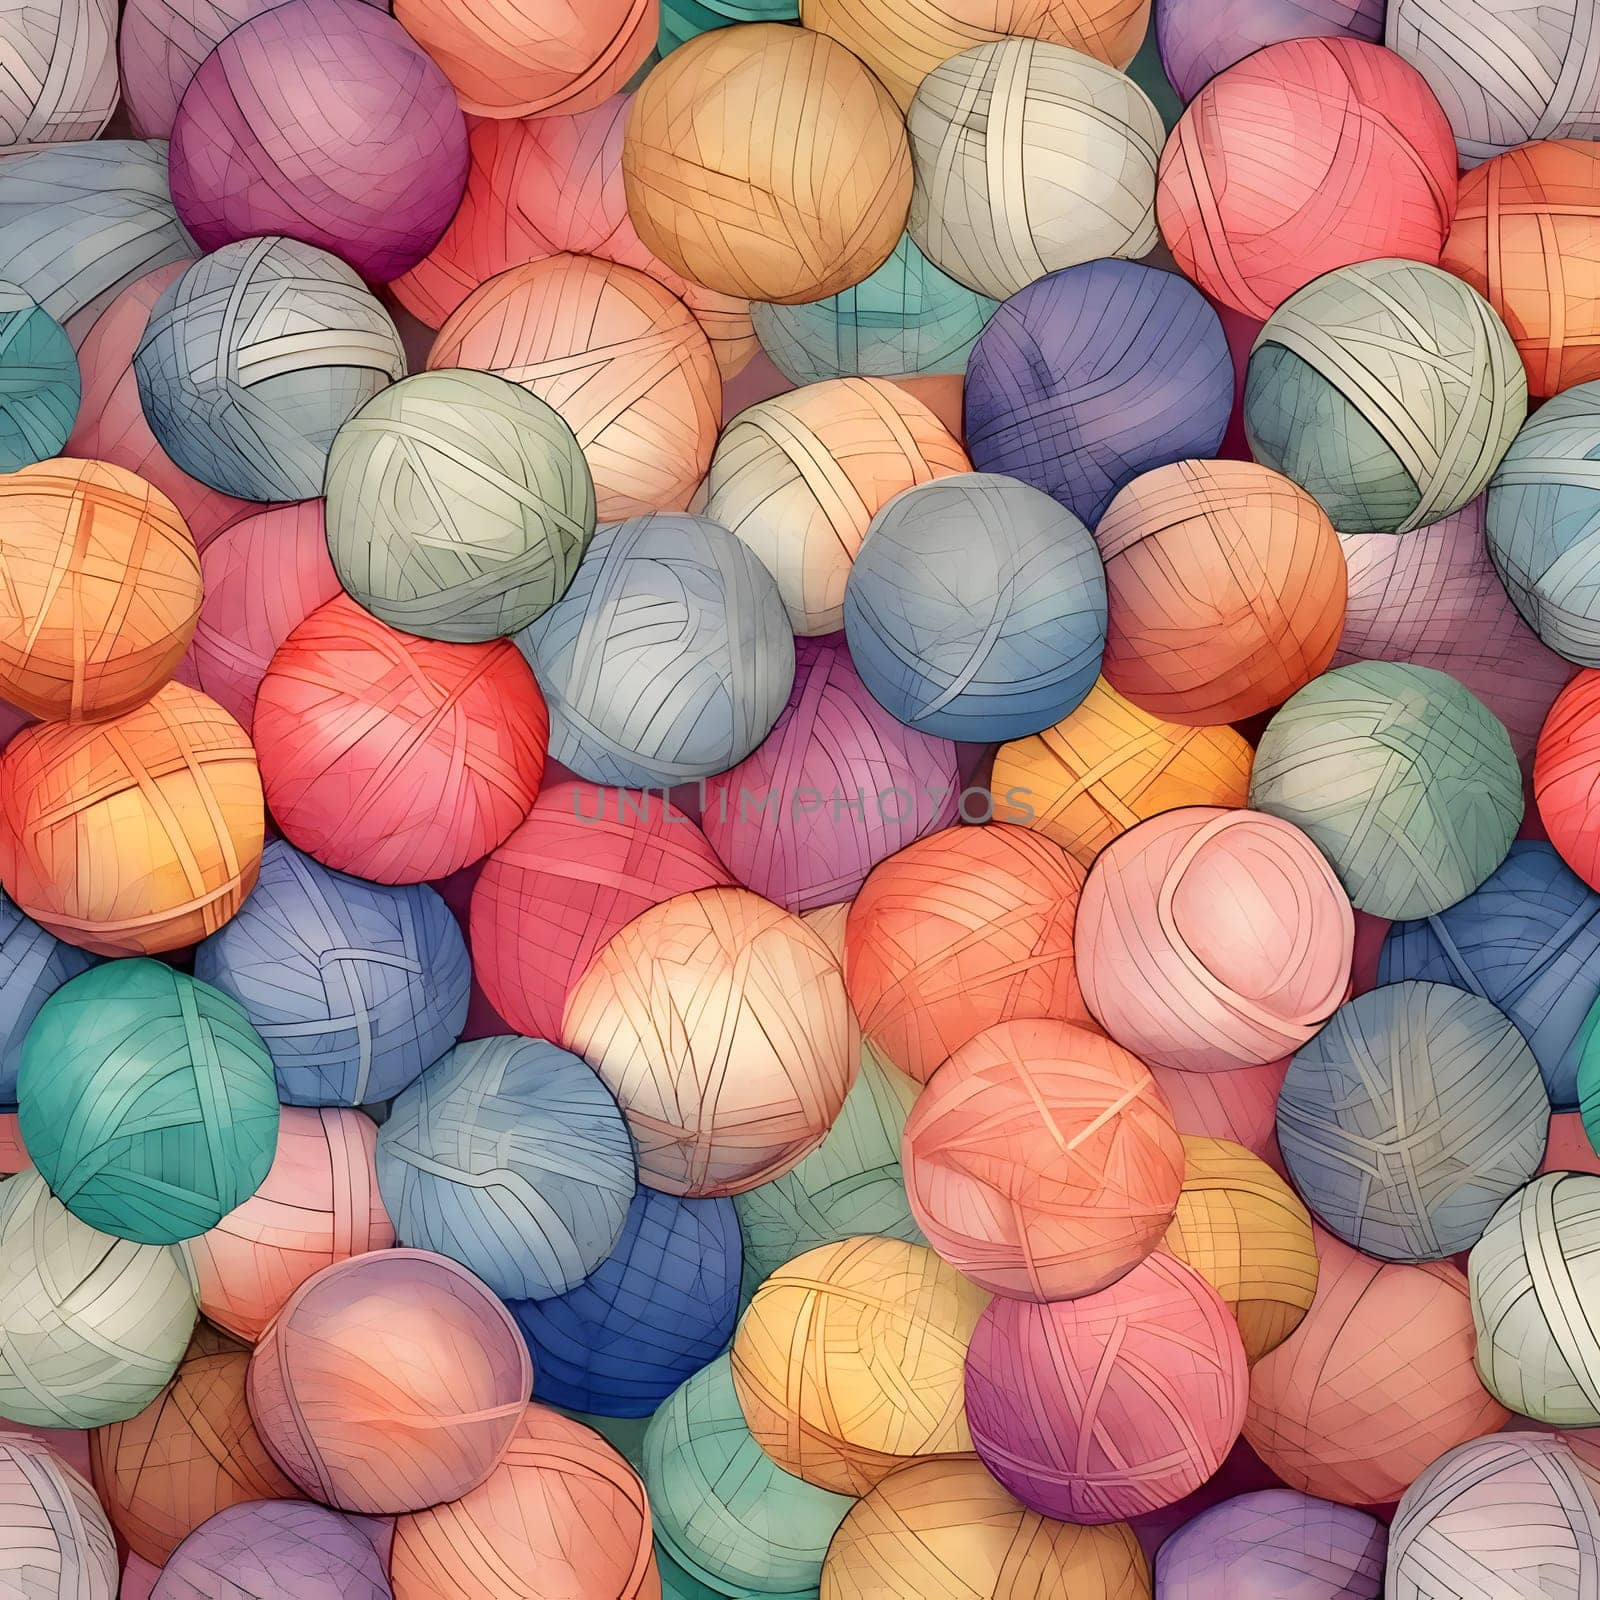 Patterns and banners backgrounds: Seamless pattern of multicolored yarn balls. Vector illustration.